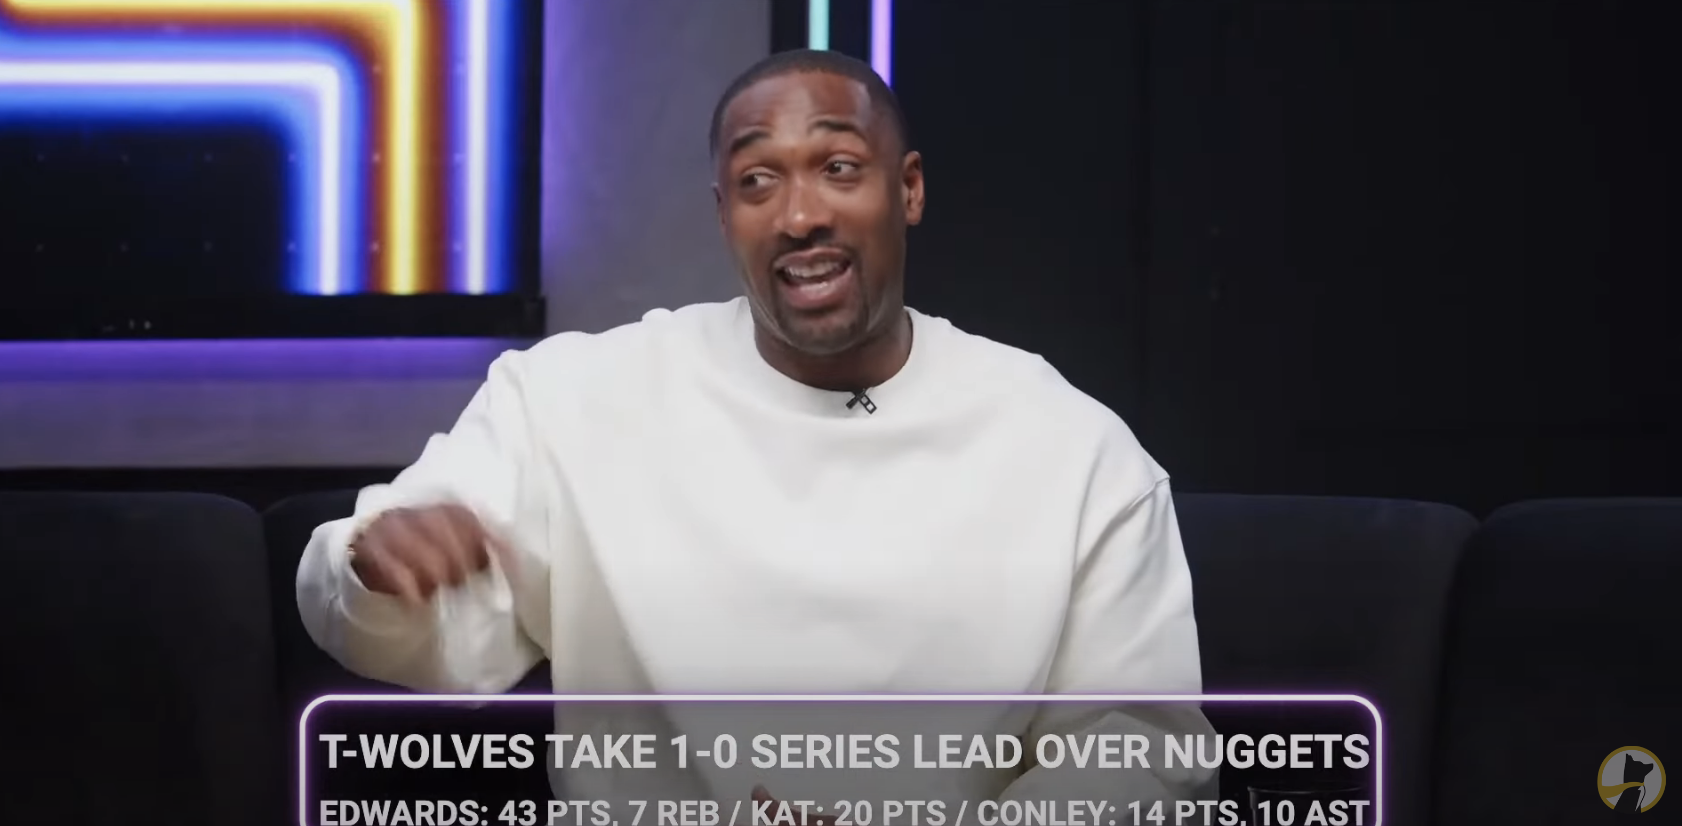 Gilbert Arenas, in a white top, gestures while discussing basketball highlights on TV show. Text overlay with game scores